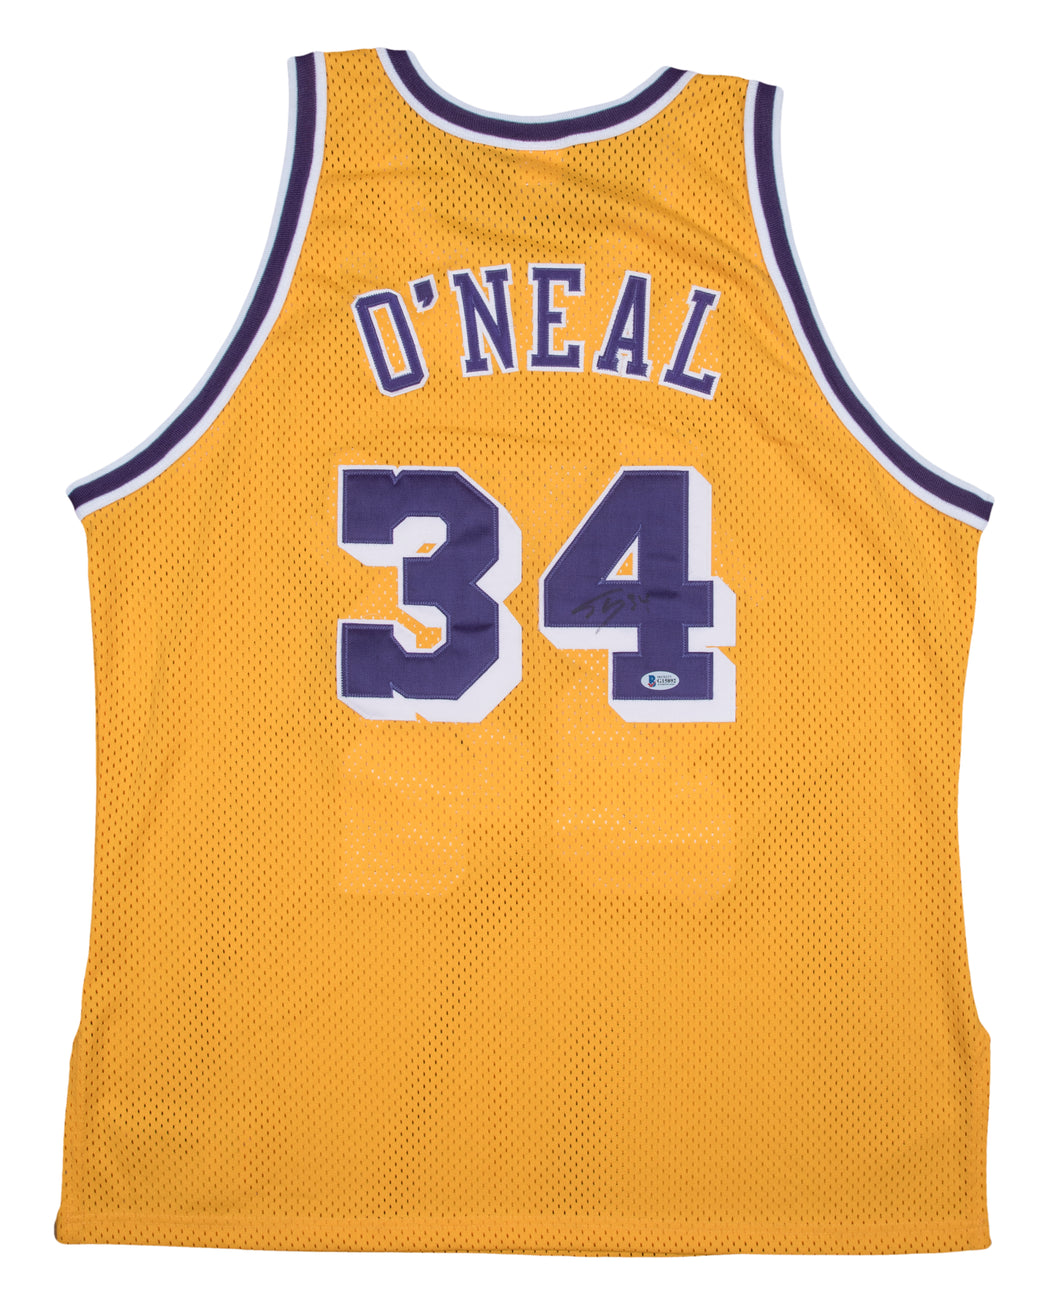 Shaquille O’Neal Autographed Lakers Jersey